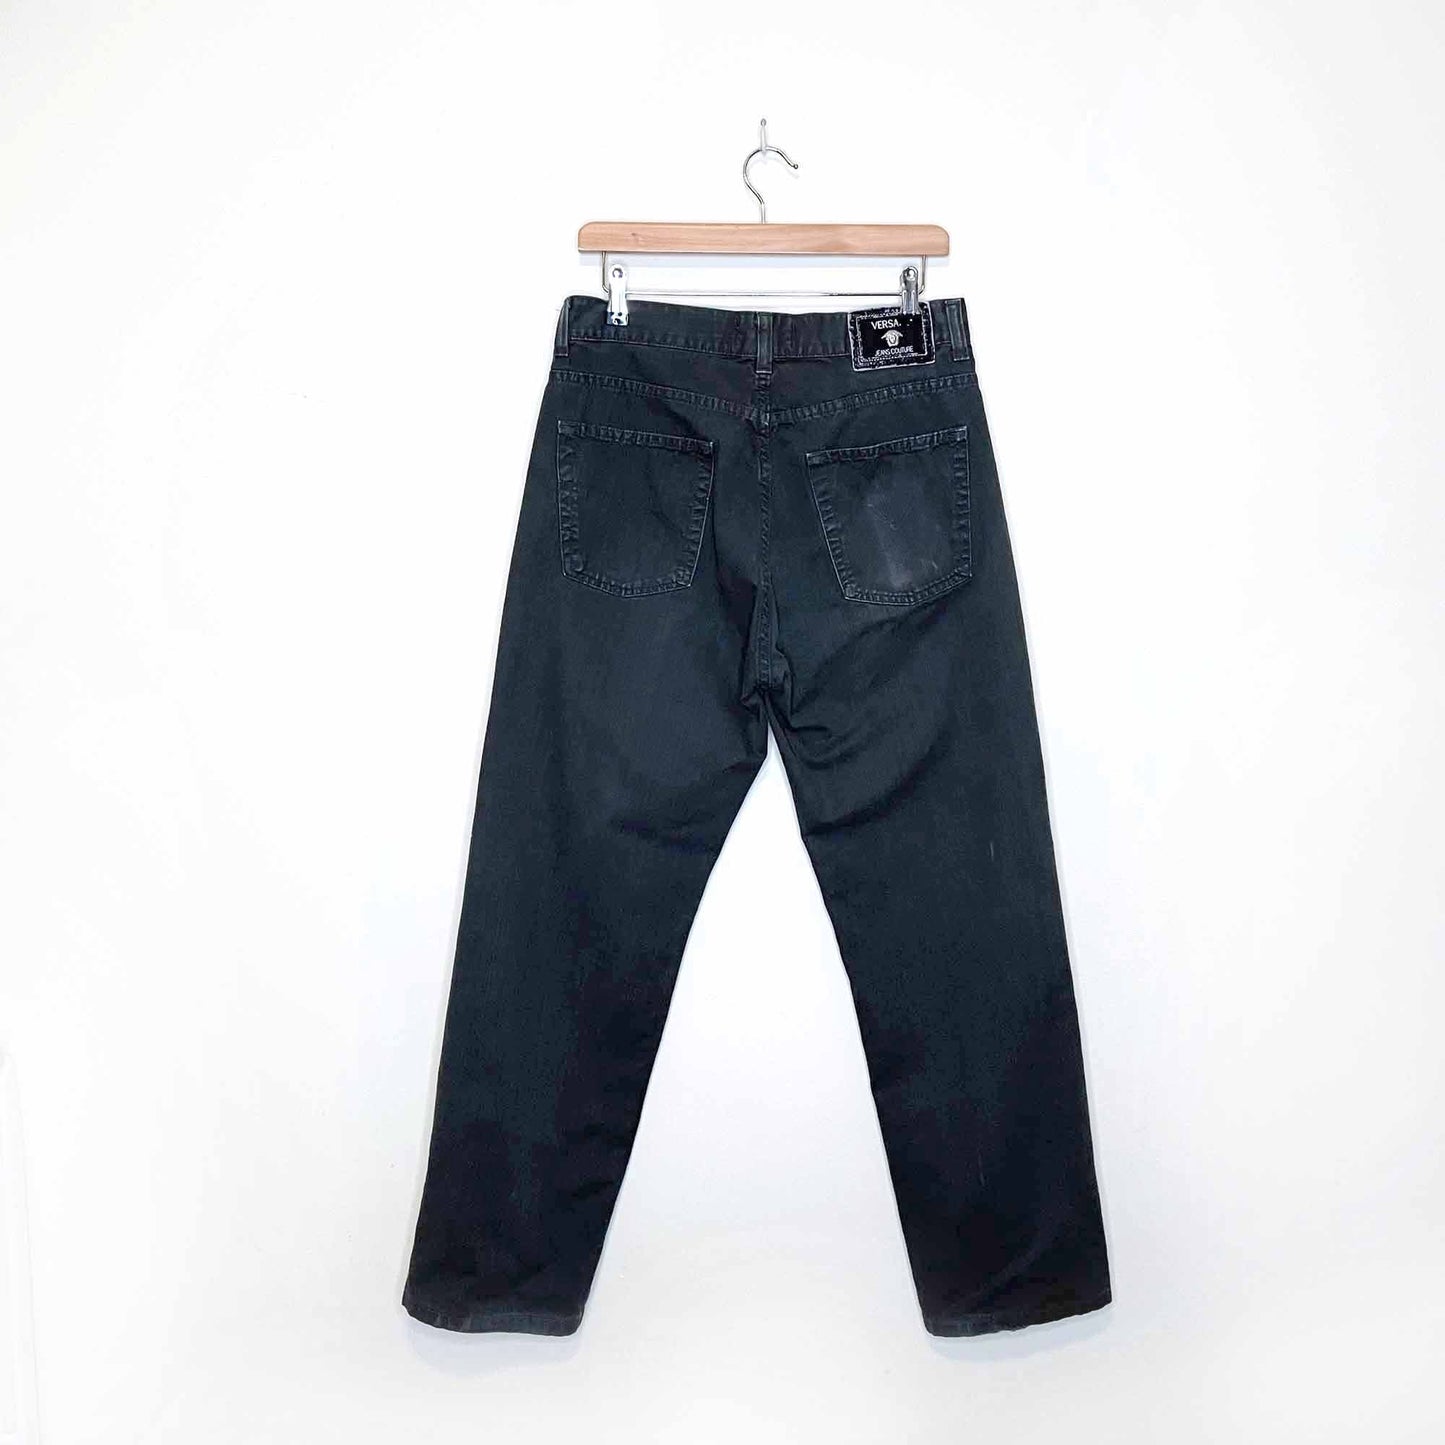 vintage 90s versace relaxed fit jeans - size 28